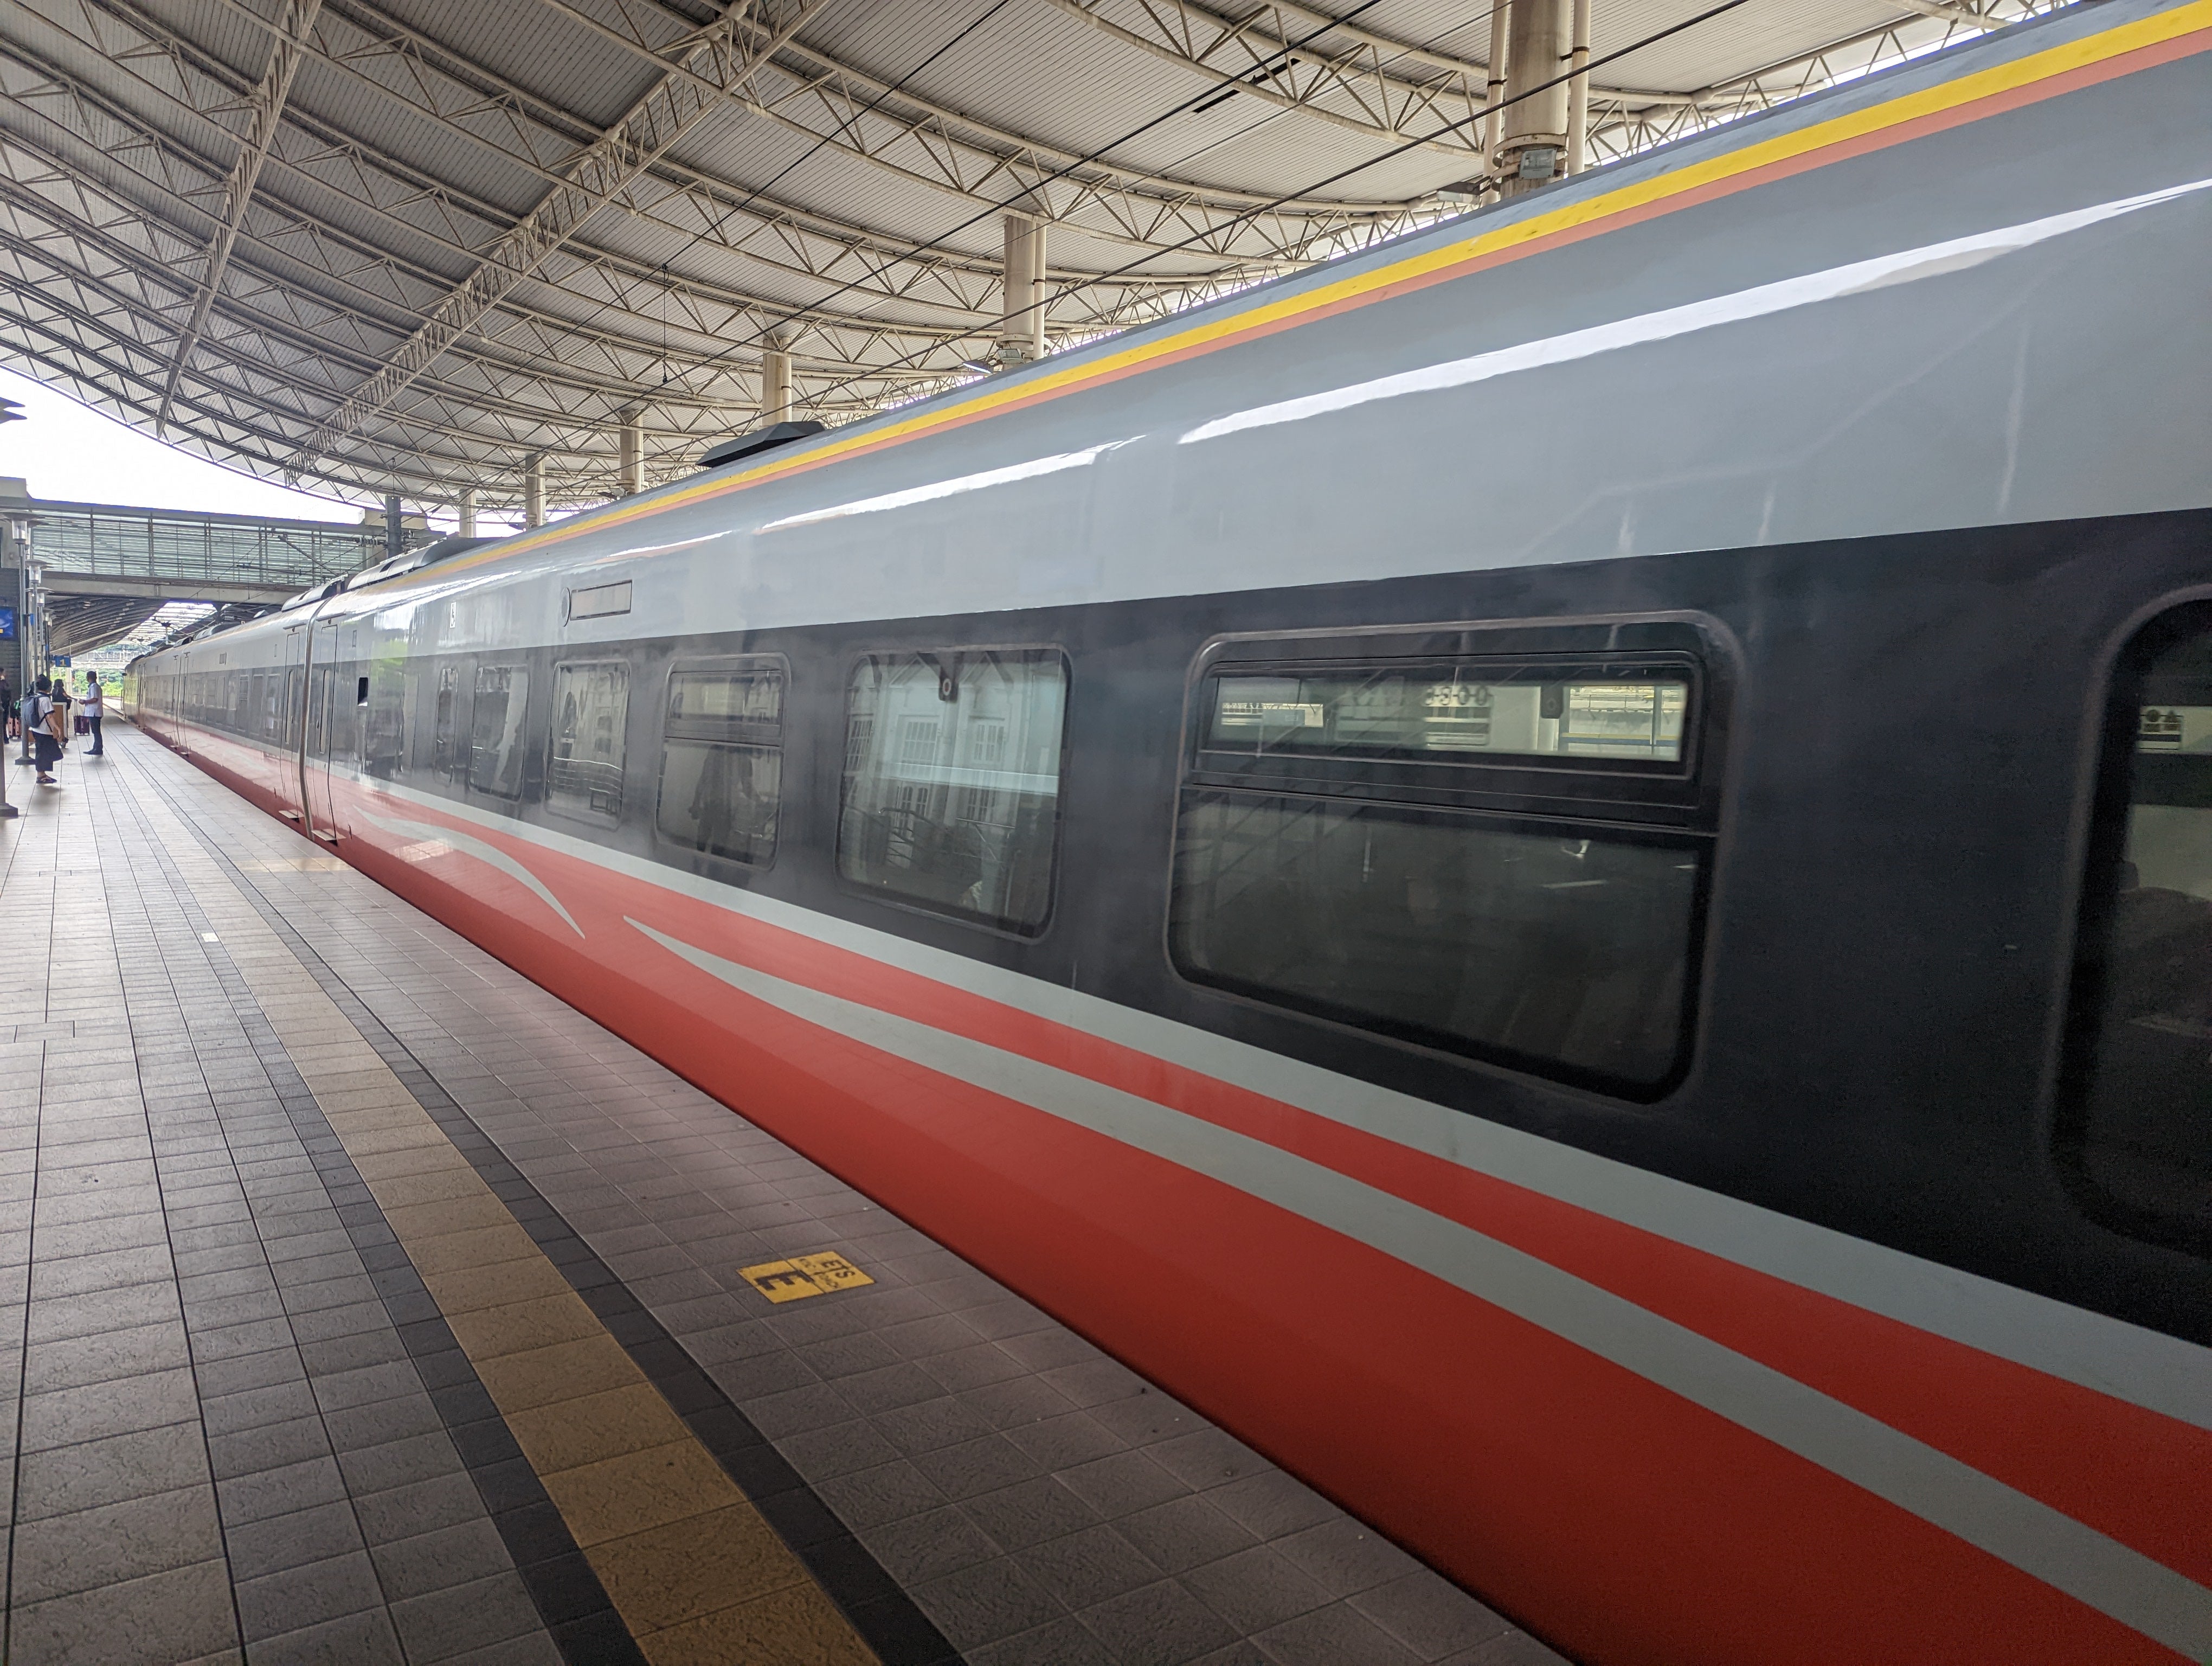 One of Malaysia’s KTM trains